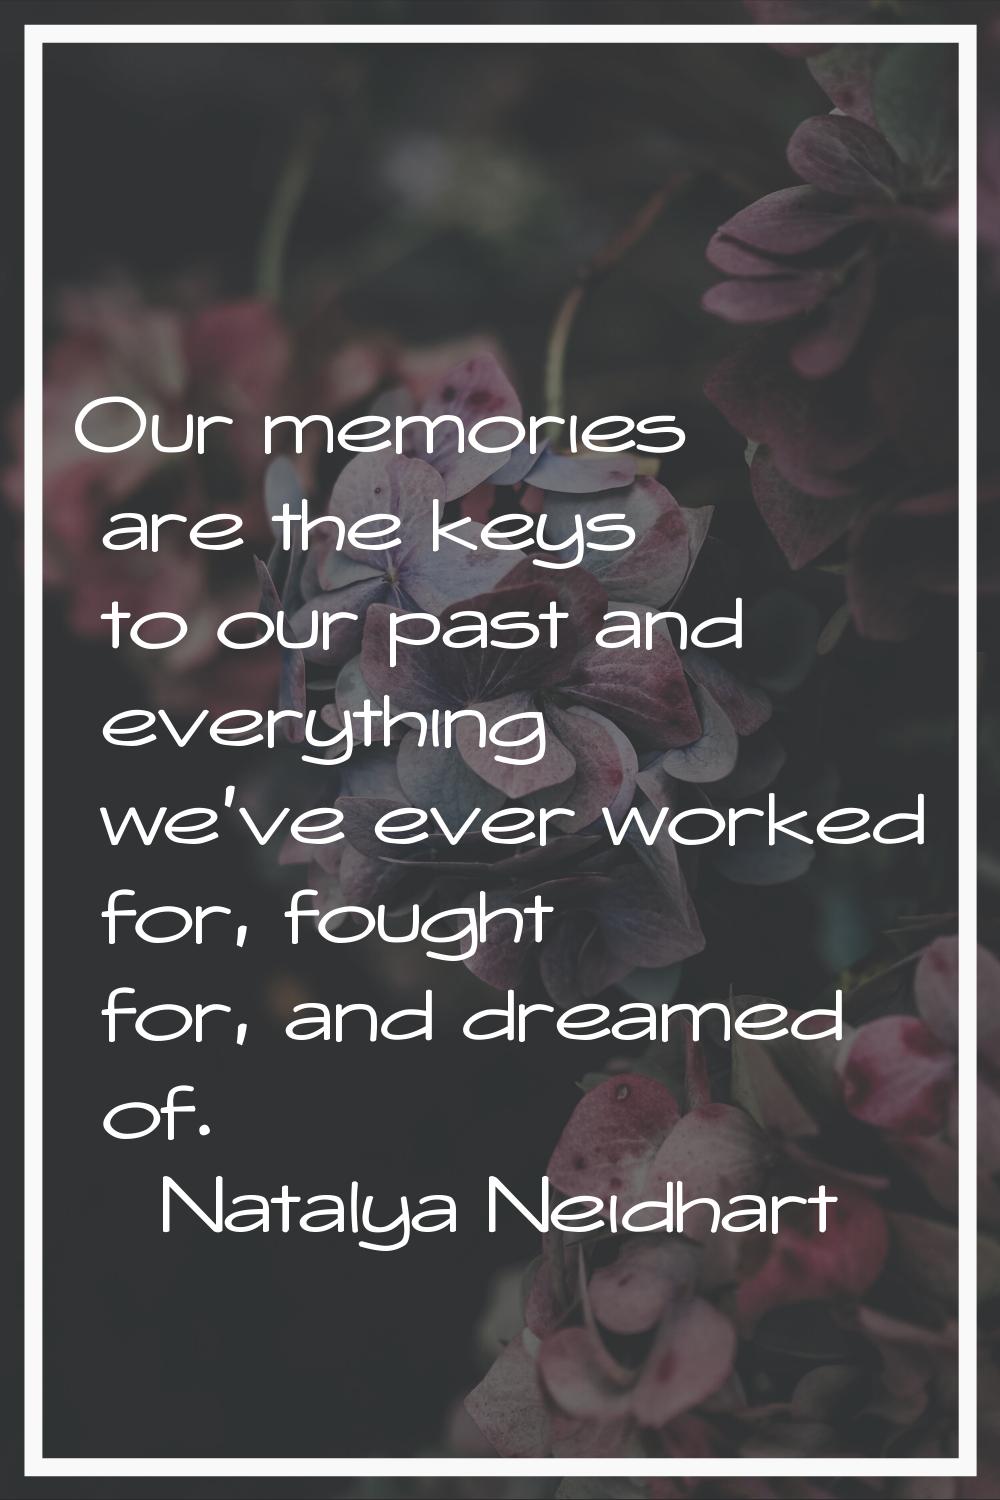 Our memories are the keys to our past and everything we've ever worked for, fought for, and dreamed